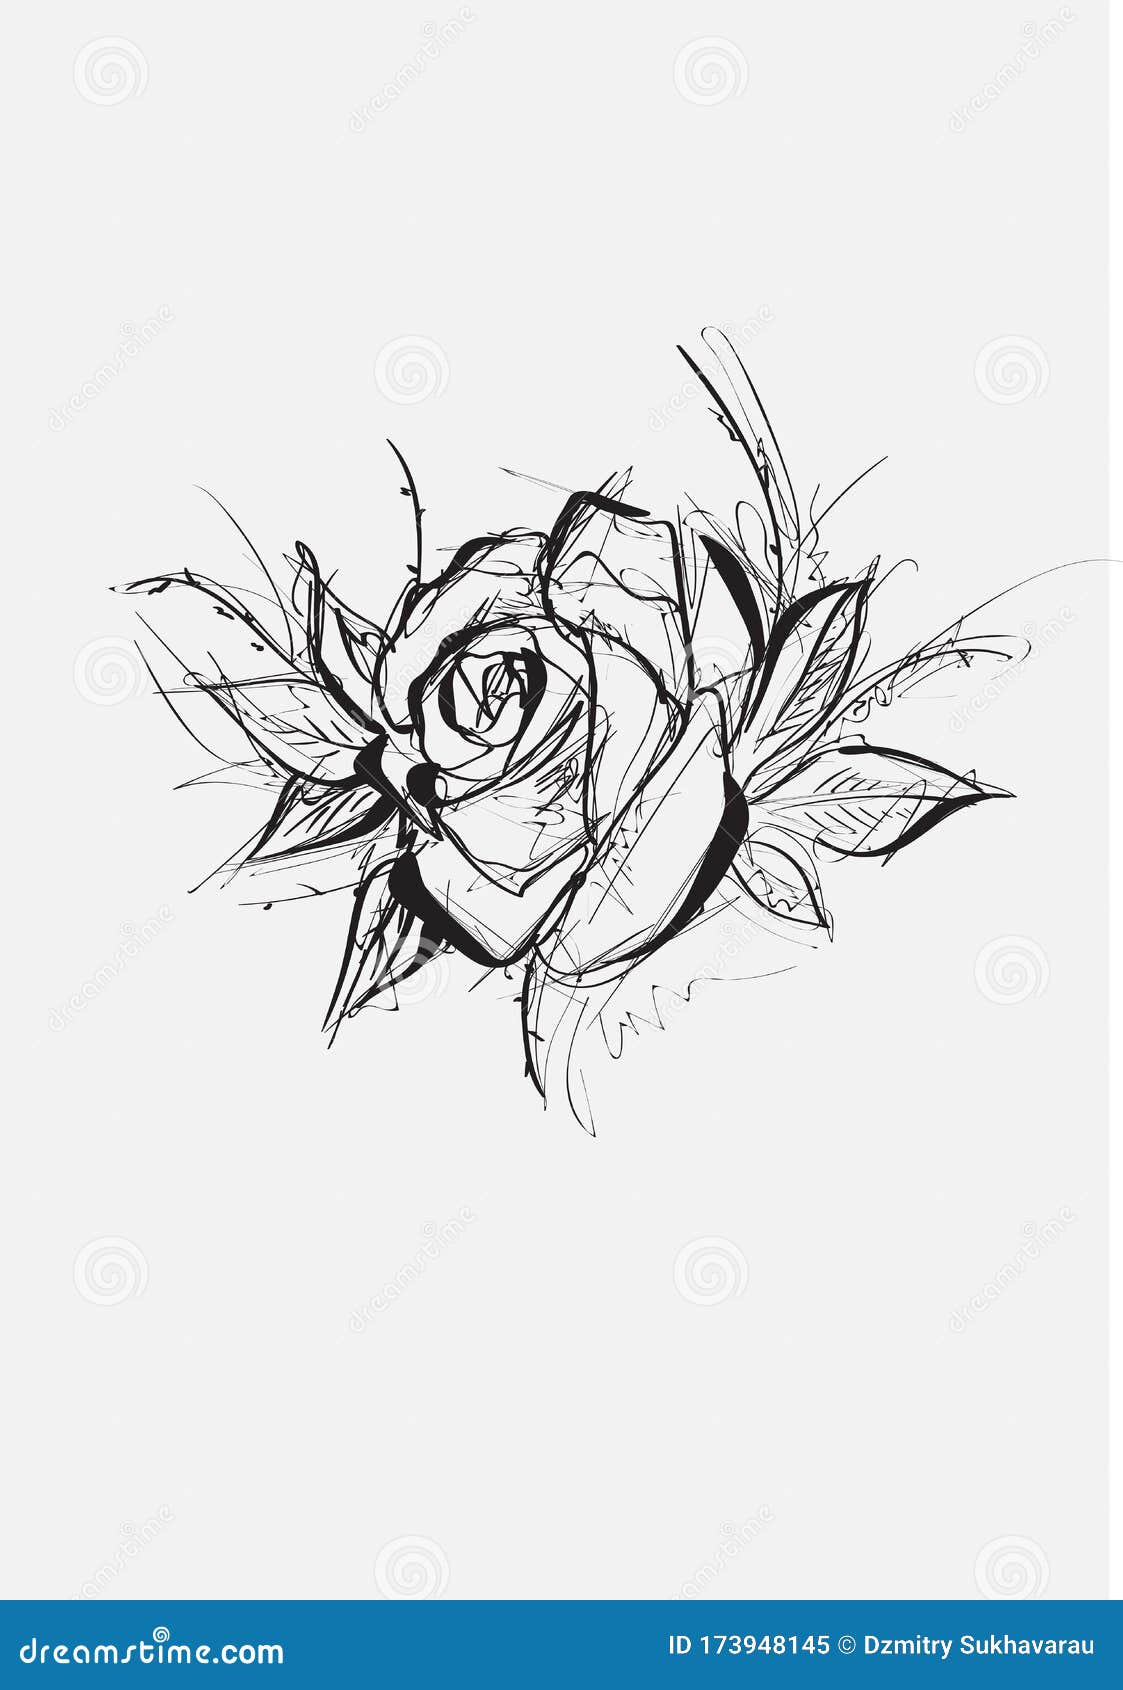 Flower Rose Sketch Painting Hand Drawing Stock Vector (Royalty Free)  1656901438 | Shutterstock